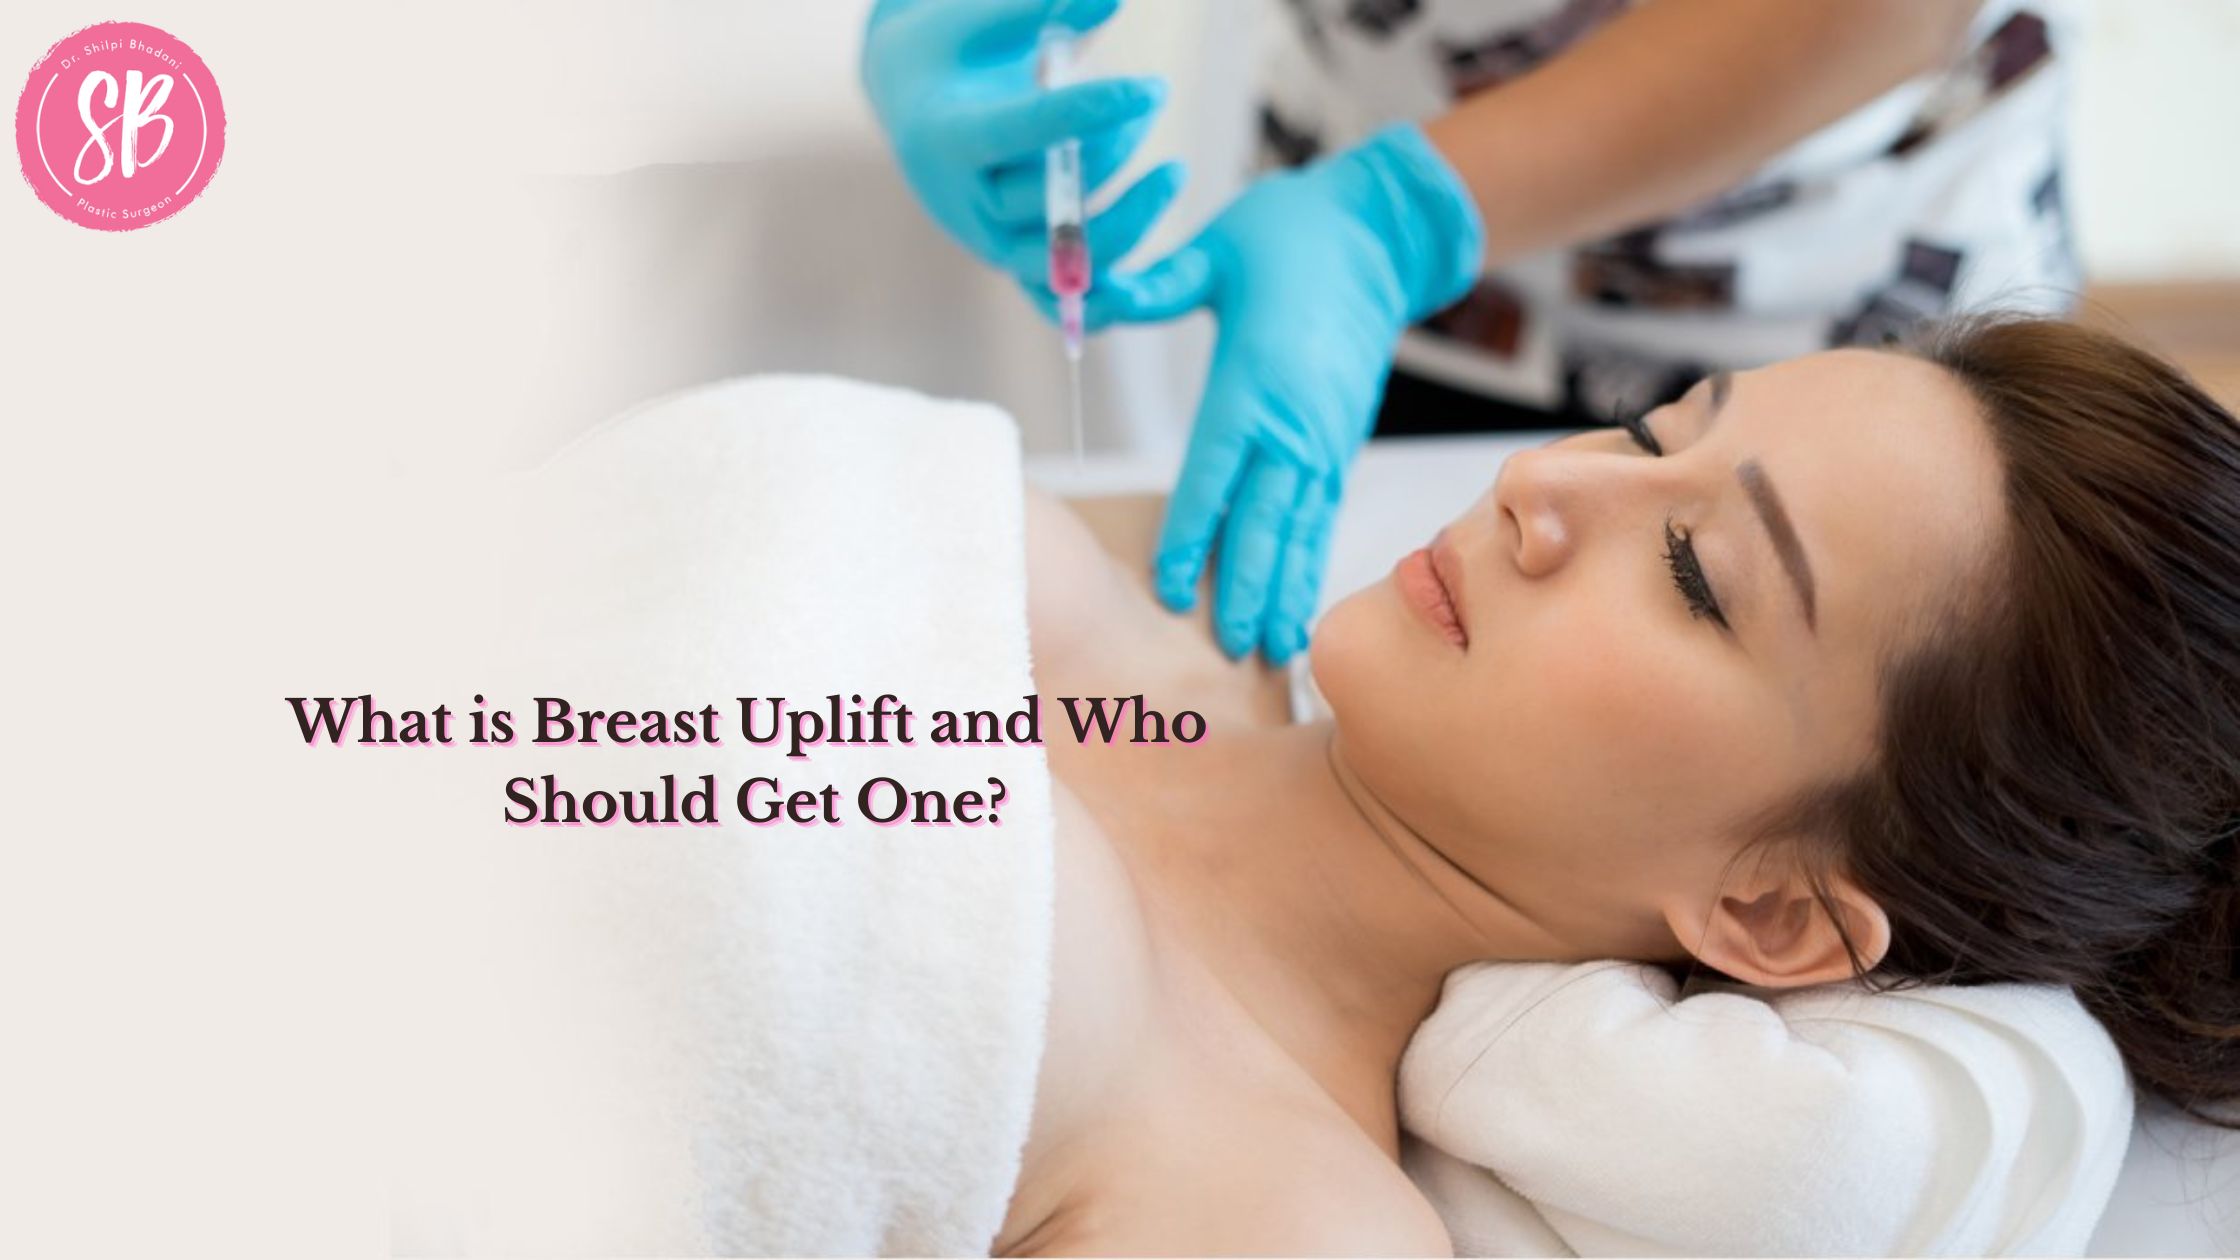 What is Breast Uplift and Who Should Get One